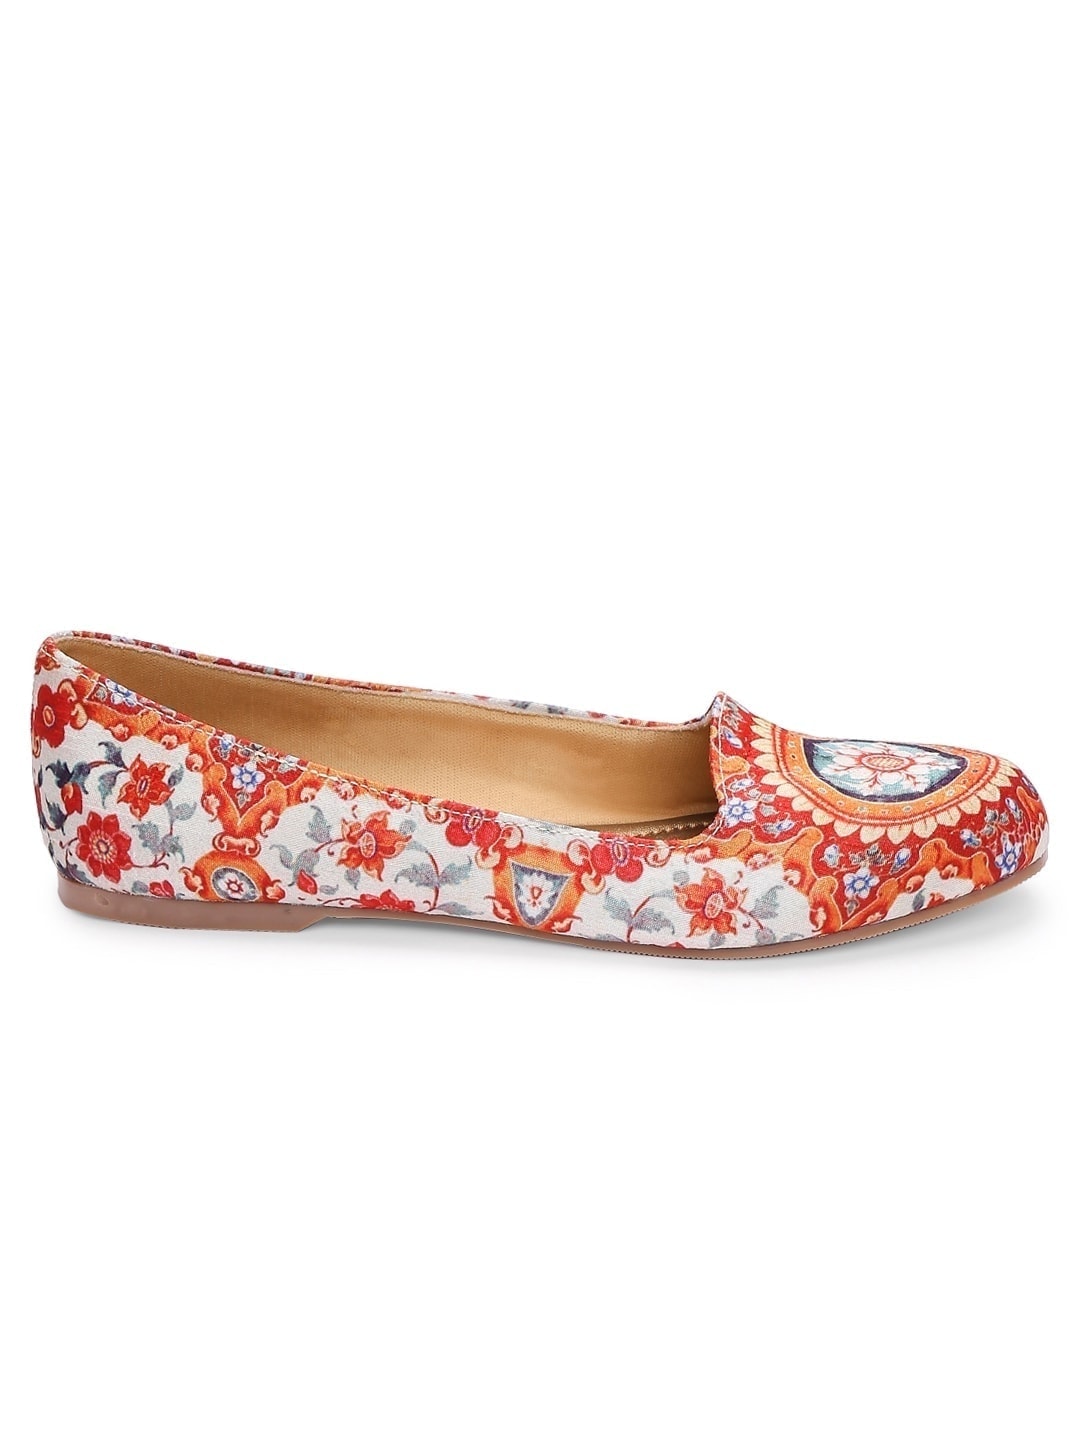 Floral Mughal Art Loafers Shoes